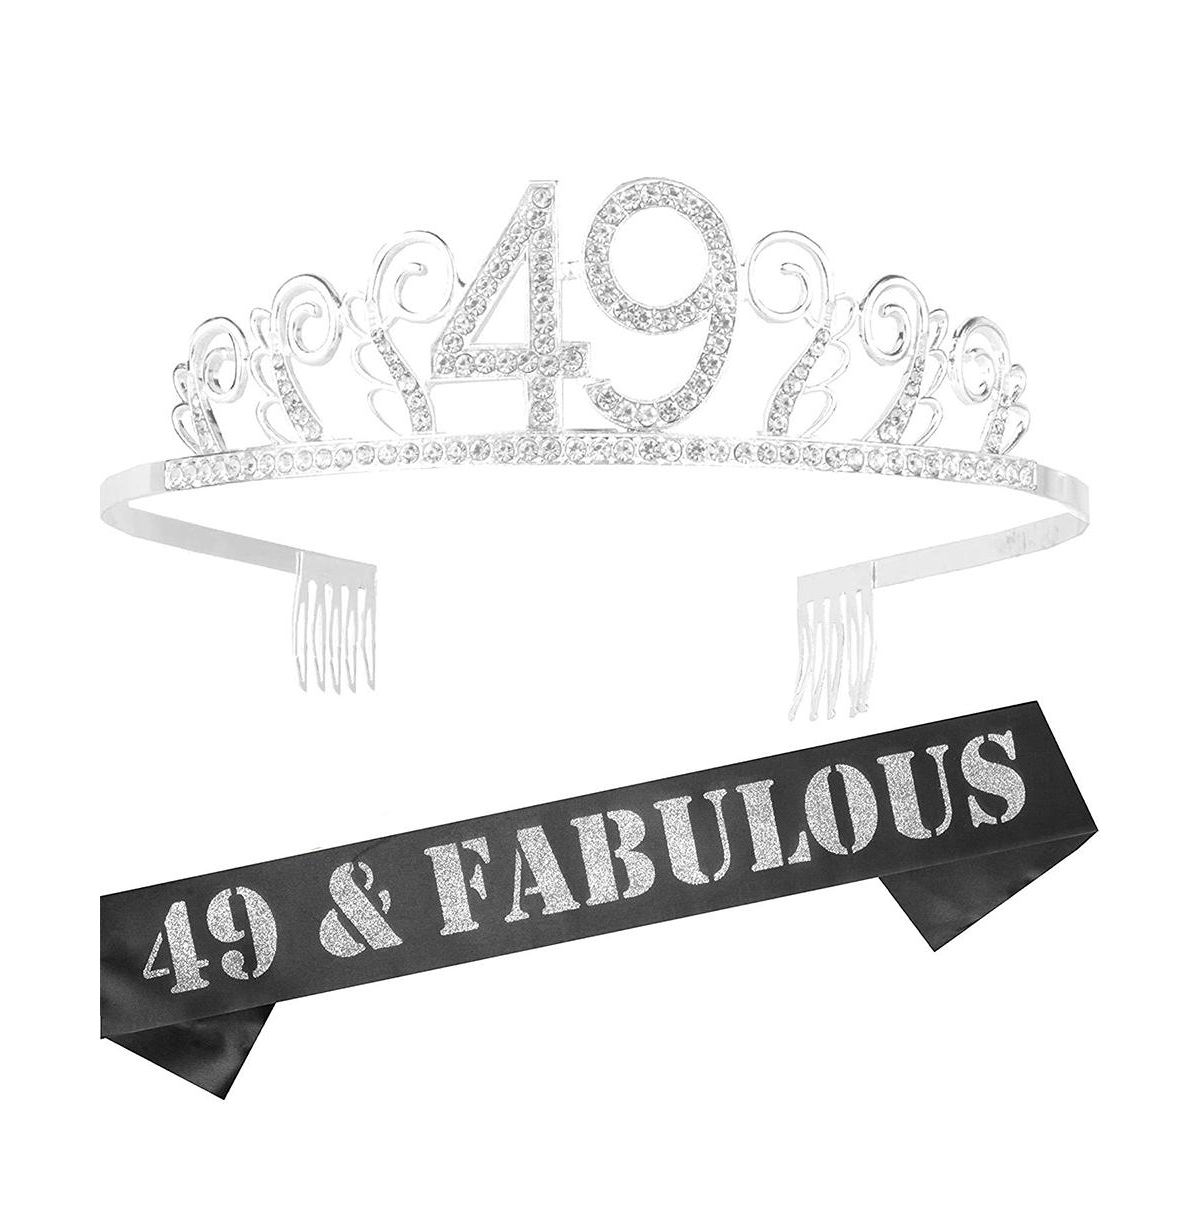 49th Birthday Sash and Tiara for Women - Glitter Sash with Waves Rhinestone Silver Metal Tiara, Perfect 49th Birthday Party Gifts and Accessories for